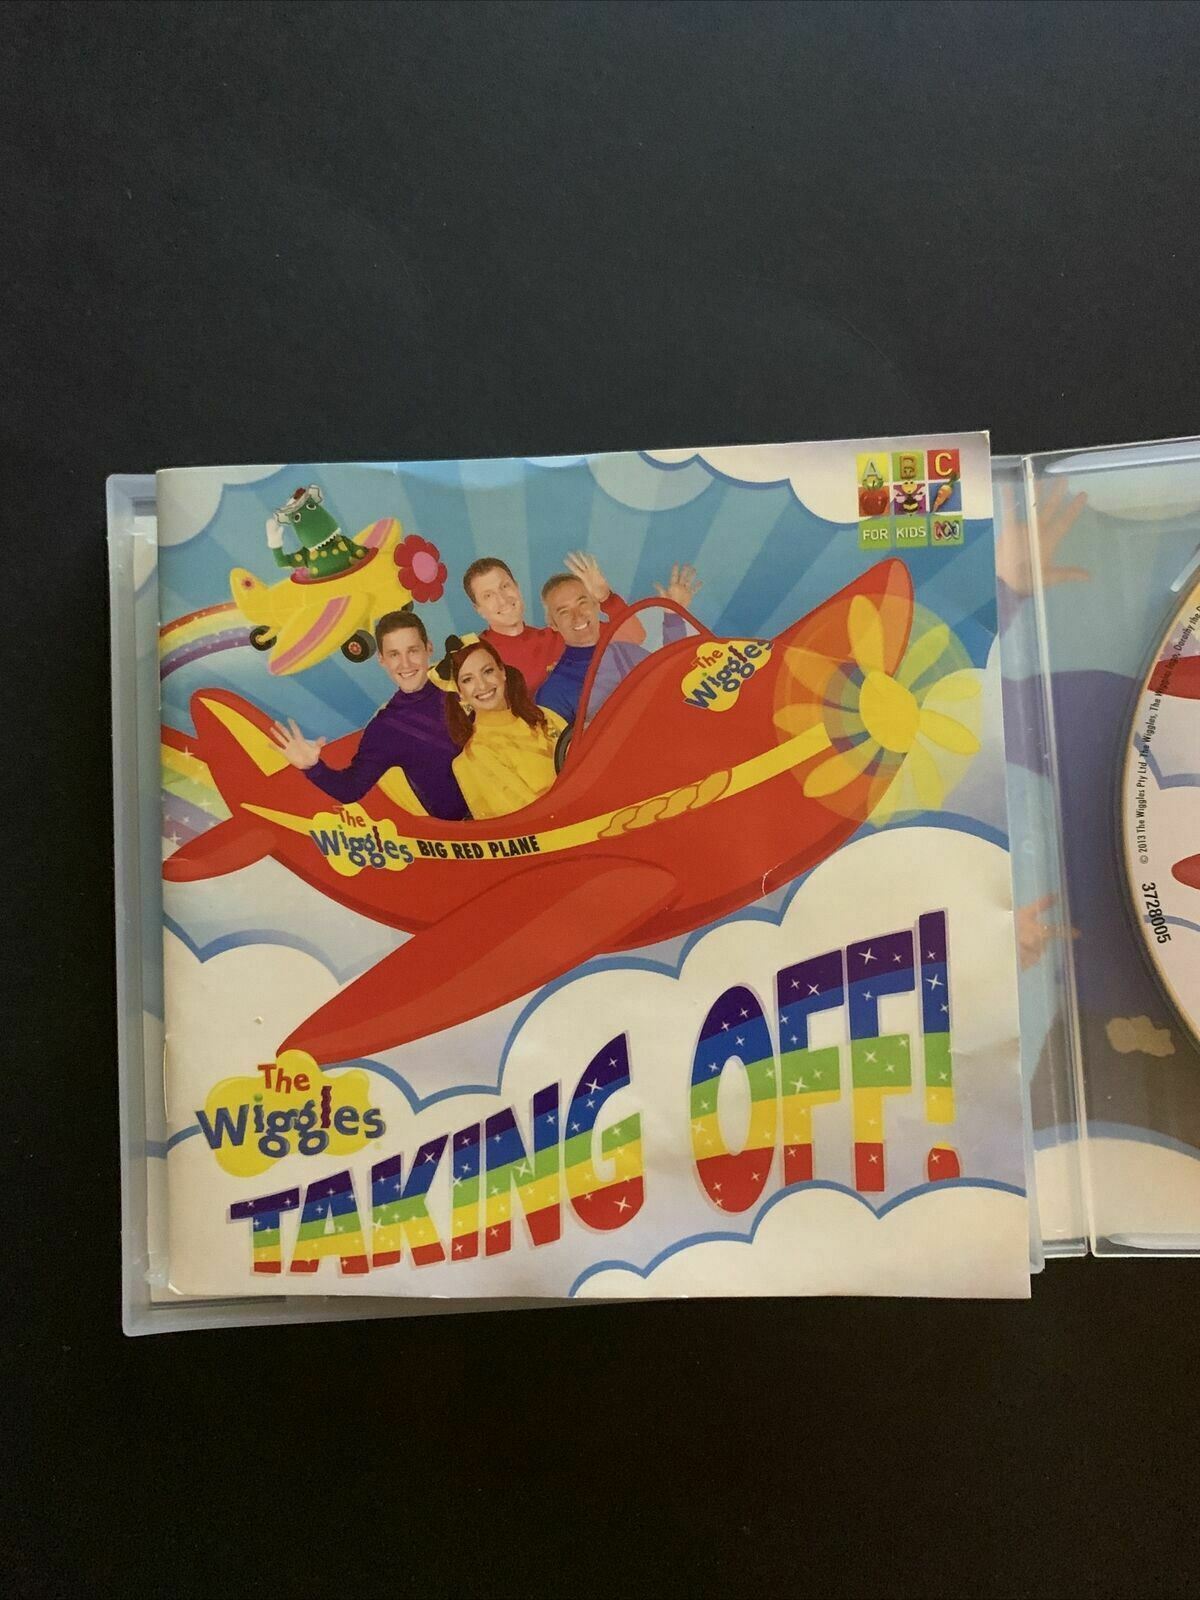 Taking Off! by The Wiggles (CD, 2013, ABC)